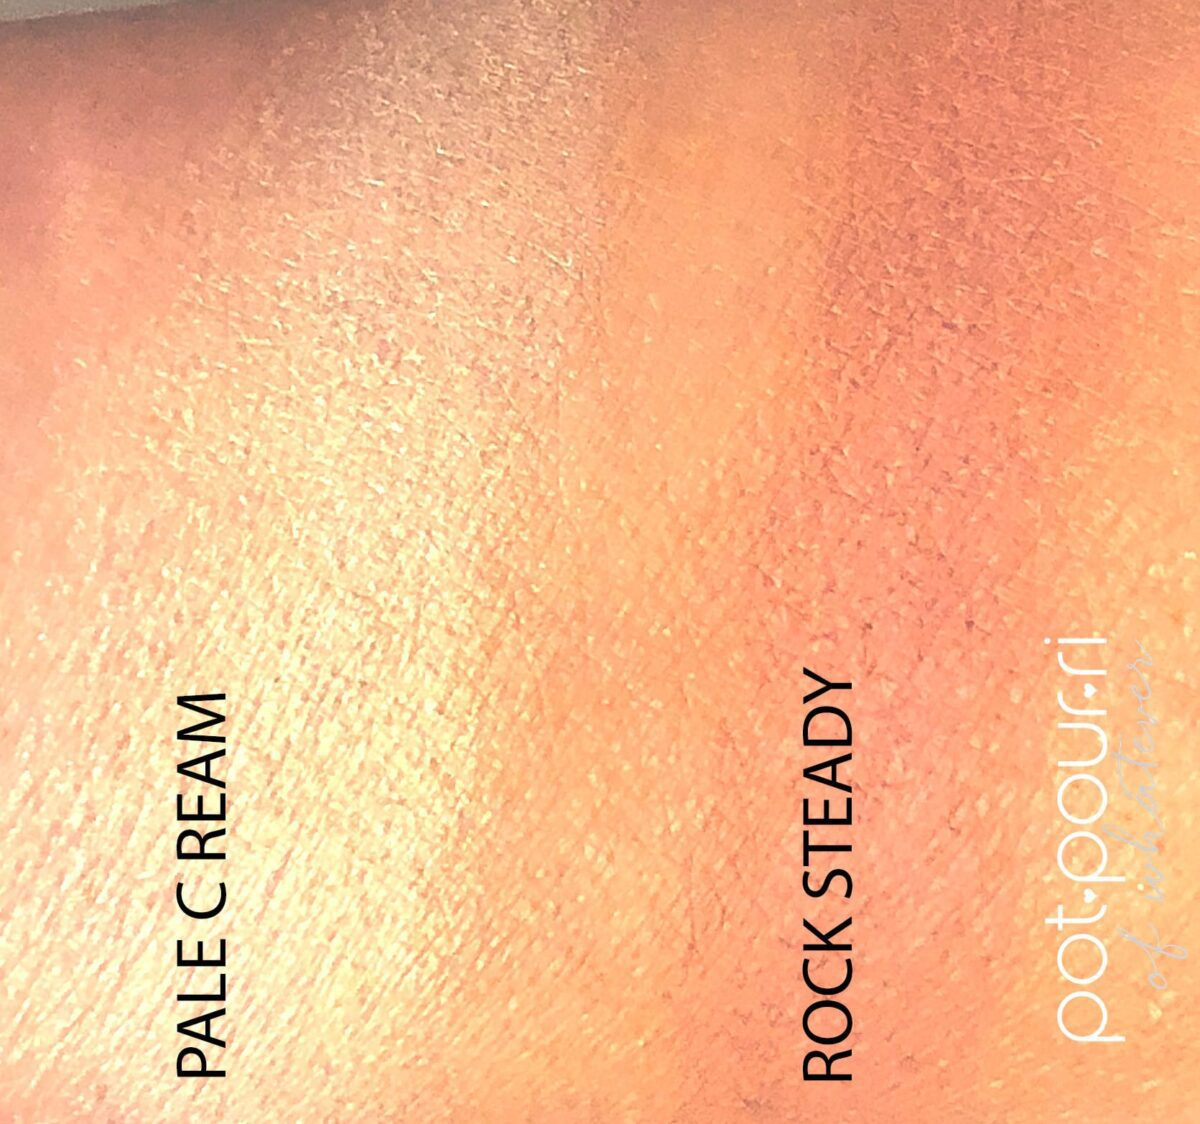 SWATCHES OF PALE CREAM, A BASE SHADE, AND ROCK STEADY, A CREASE TRANSITION SHADE